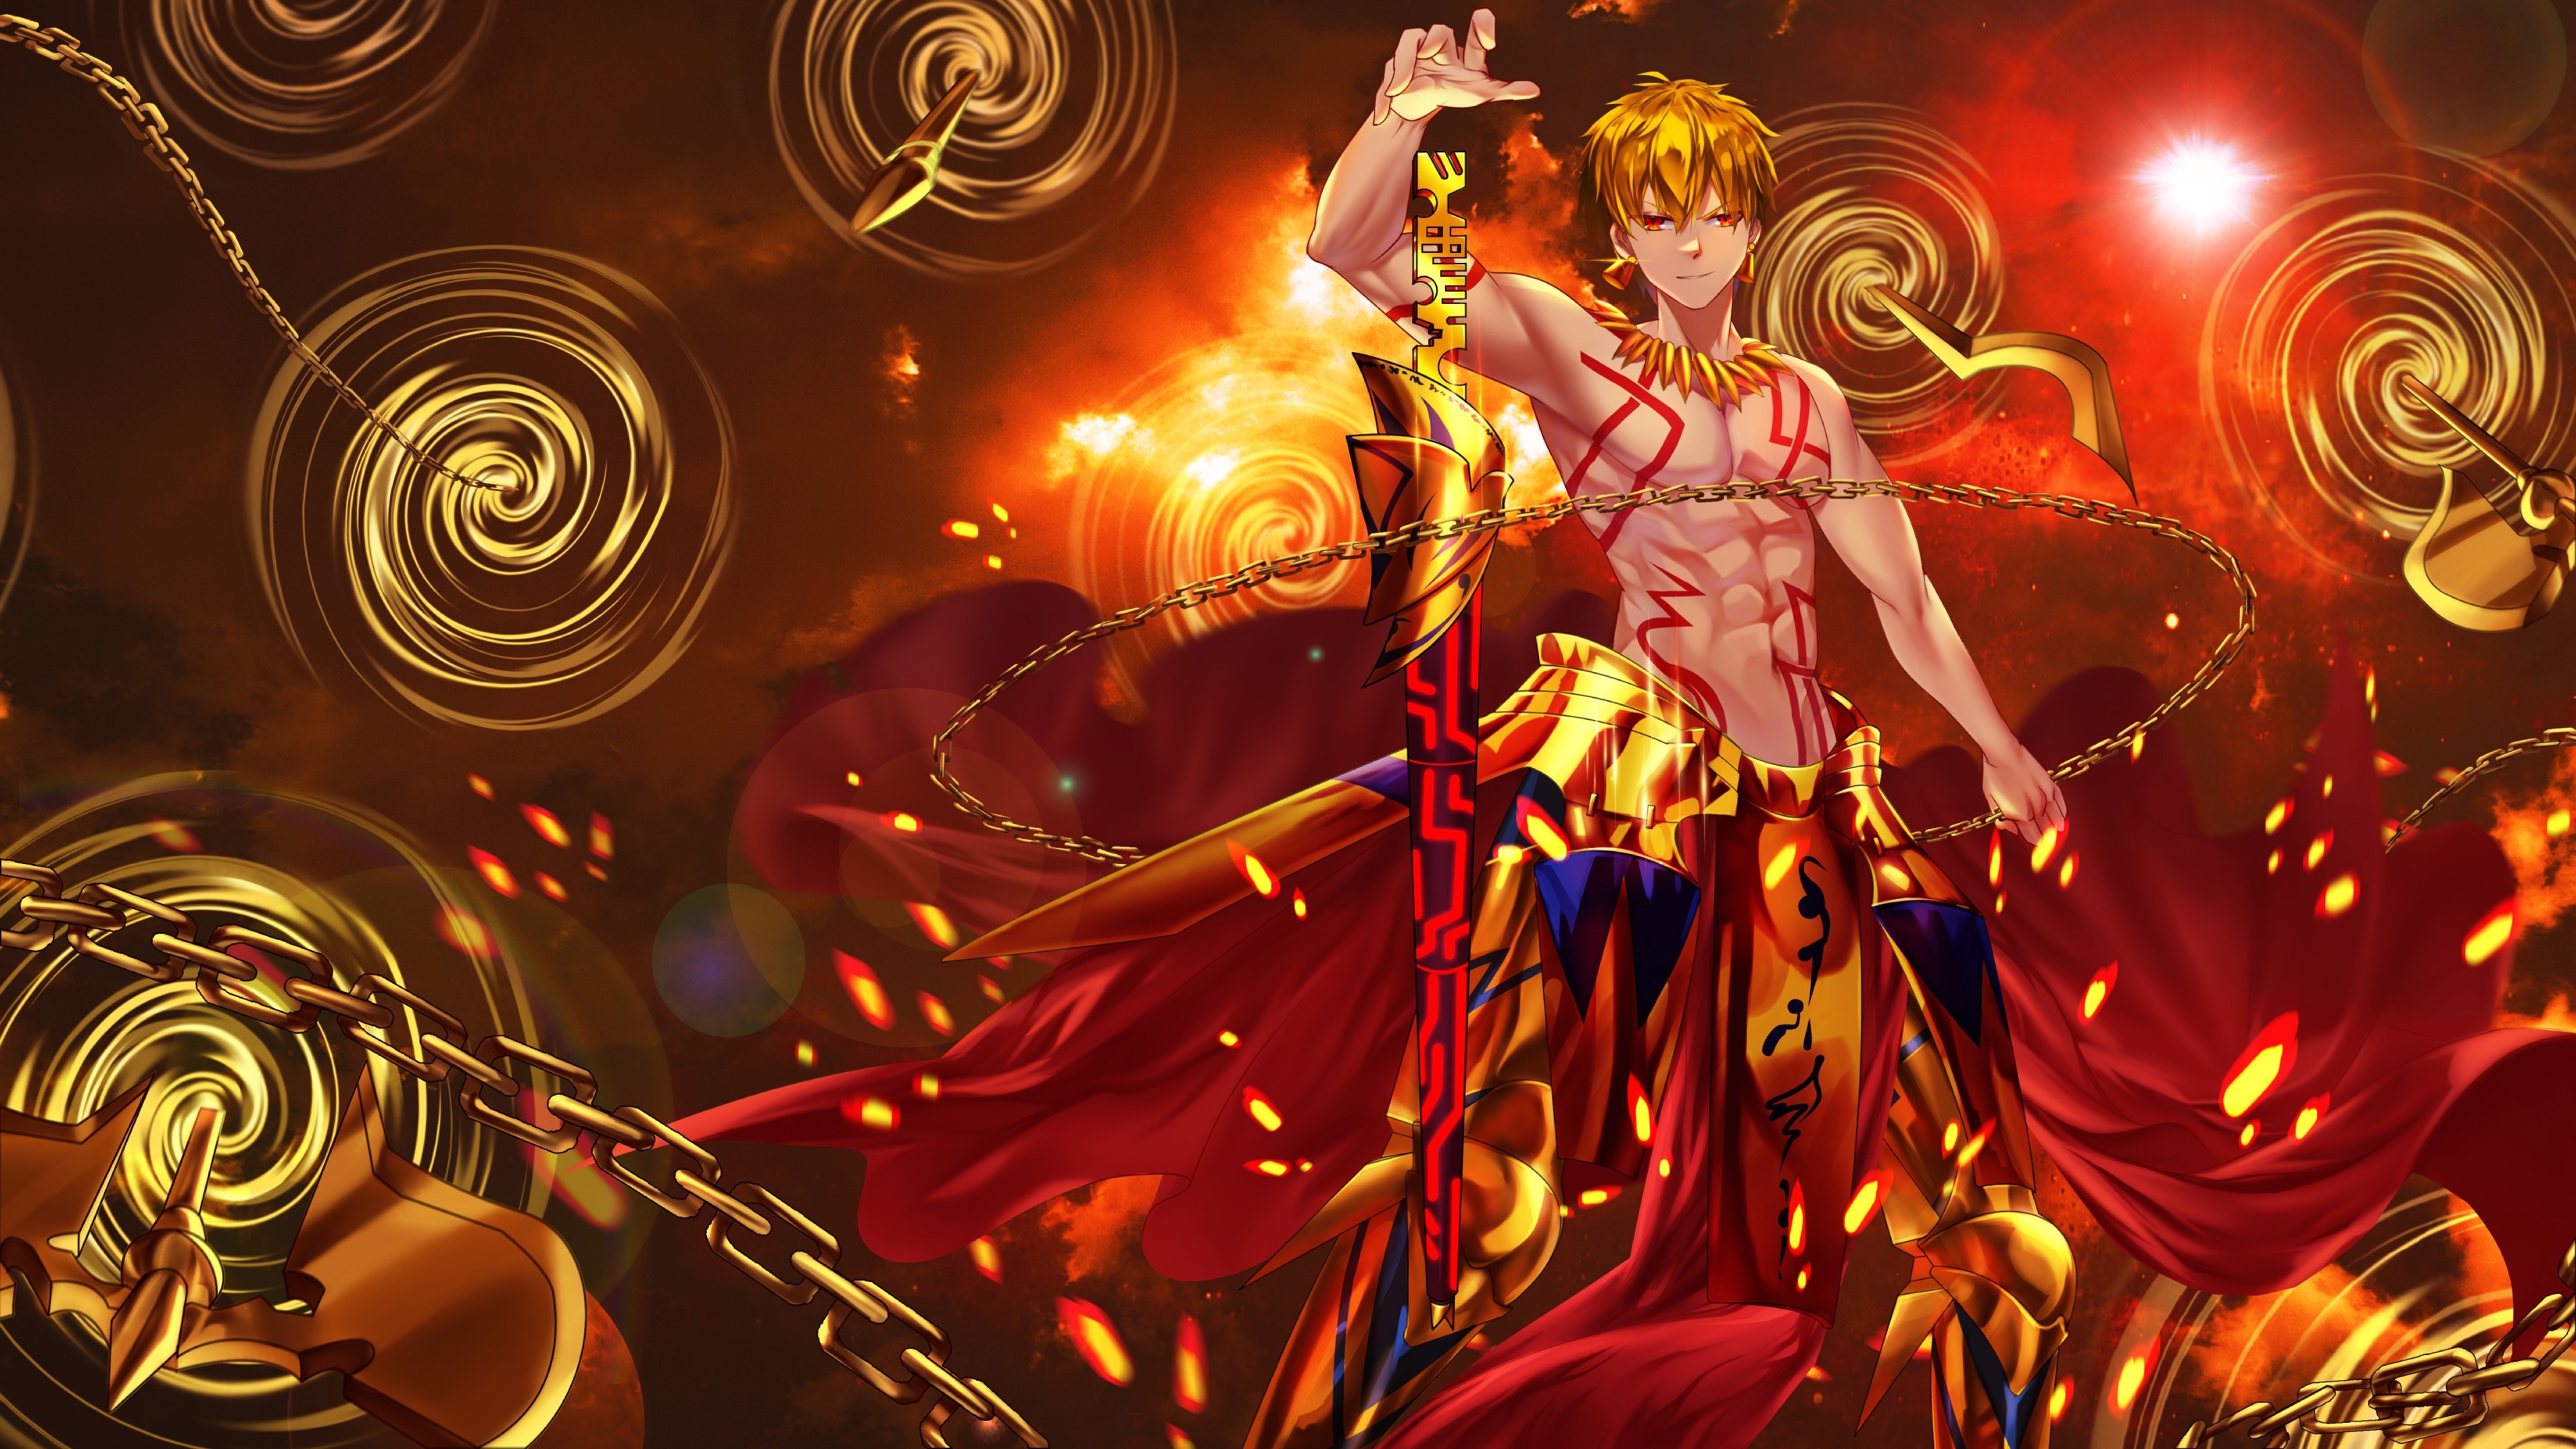 3840x2160 Gilgamesh Fate Anime 4k Wallpaper Hd Anime 4k Wallpapers Images Photos And Background Wallpapers Den